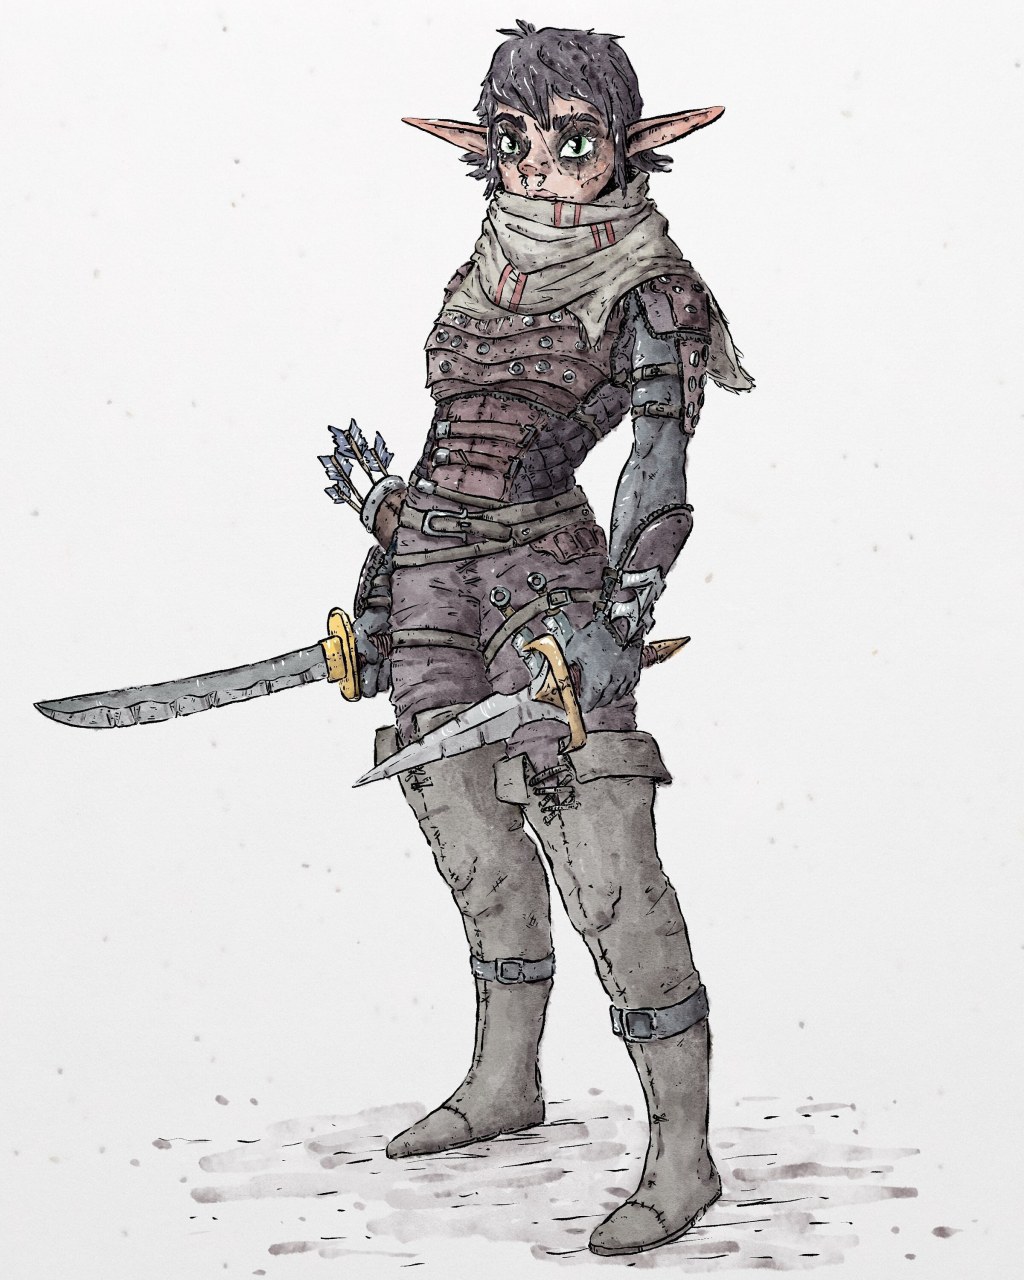 concept art dnd characters - Custom Character Art RPG DnD Dungeons and Dragons - Etsy